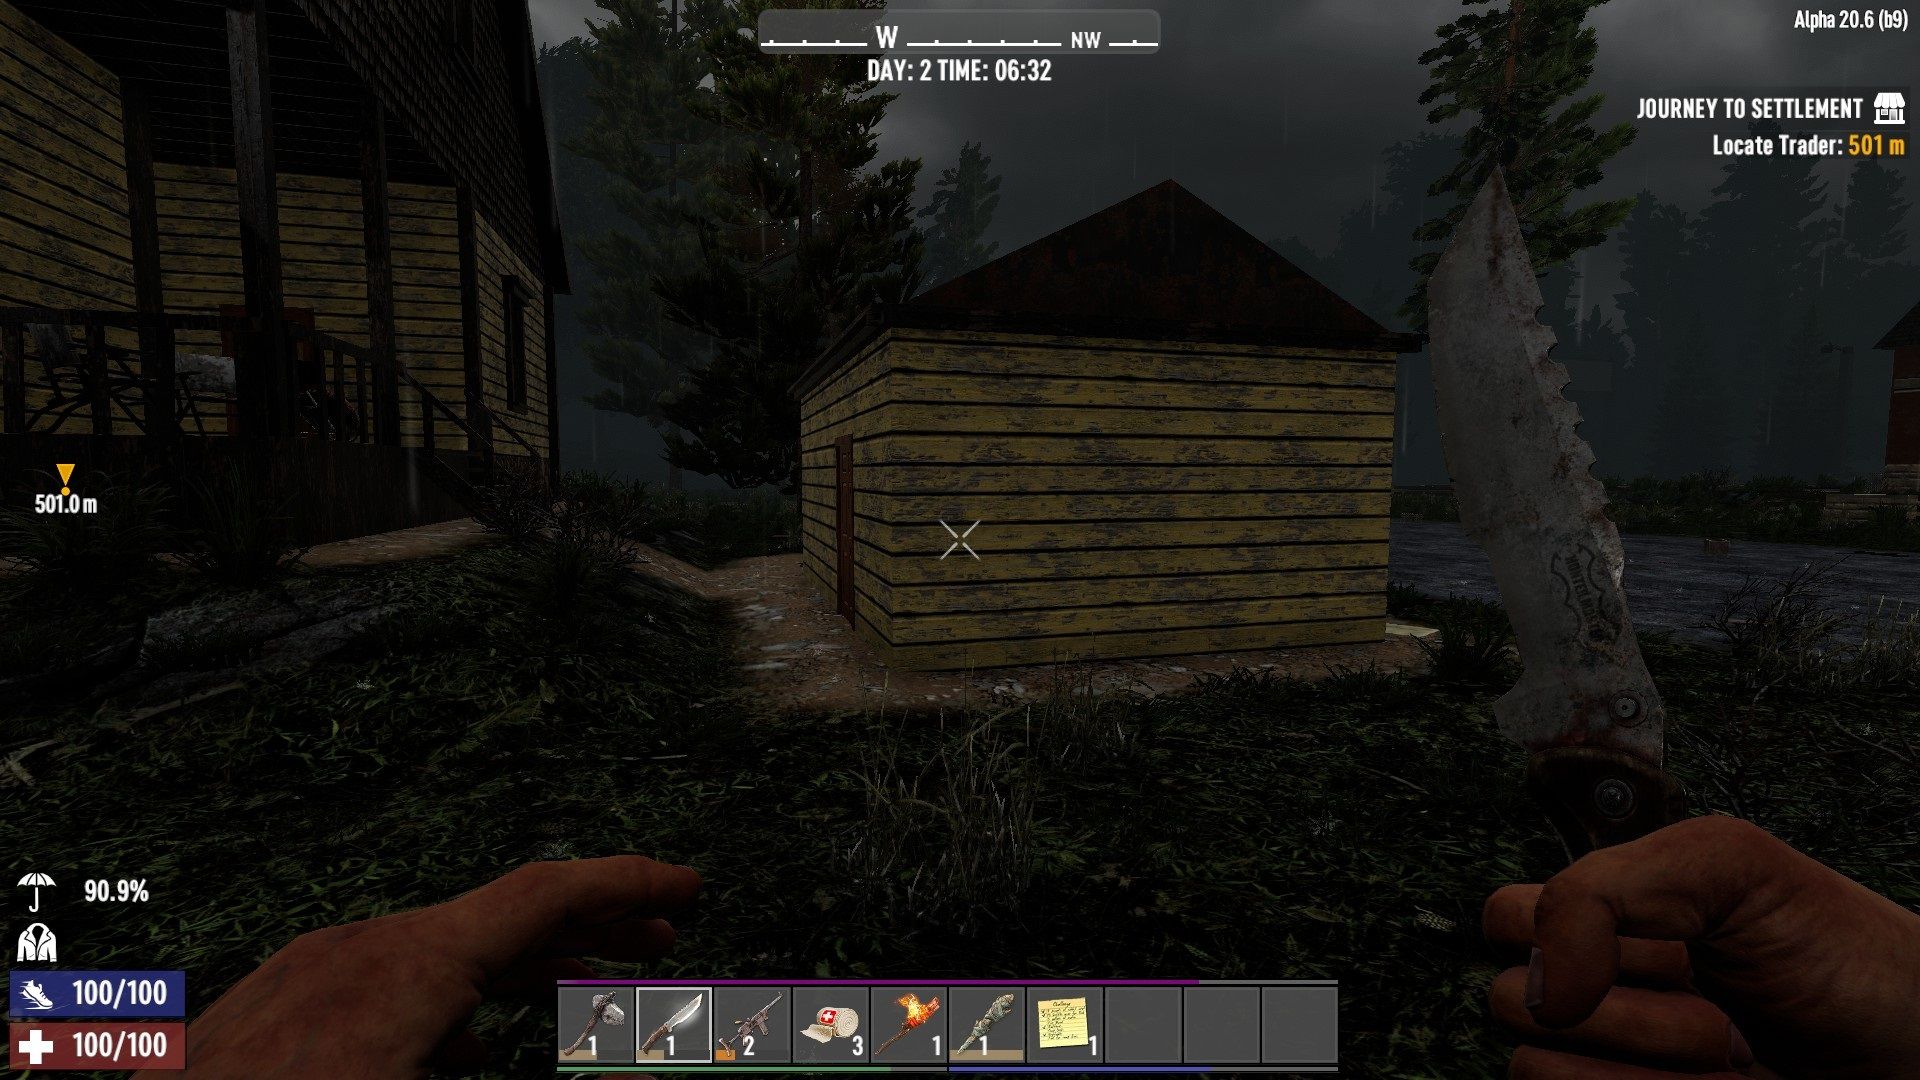 breaking into a shed 7 days to die.jpg